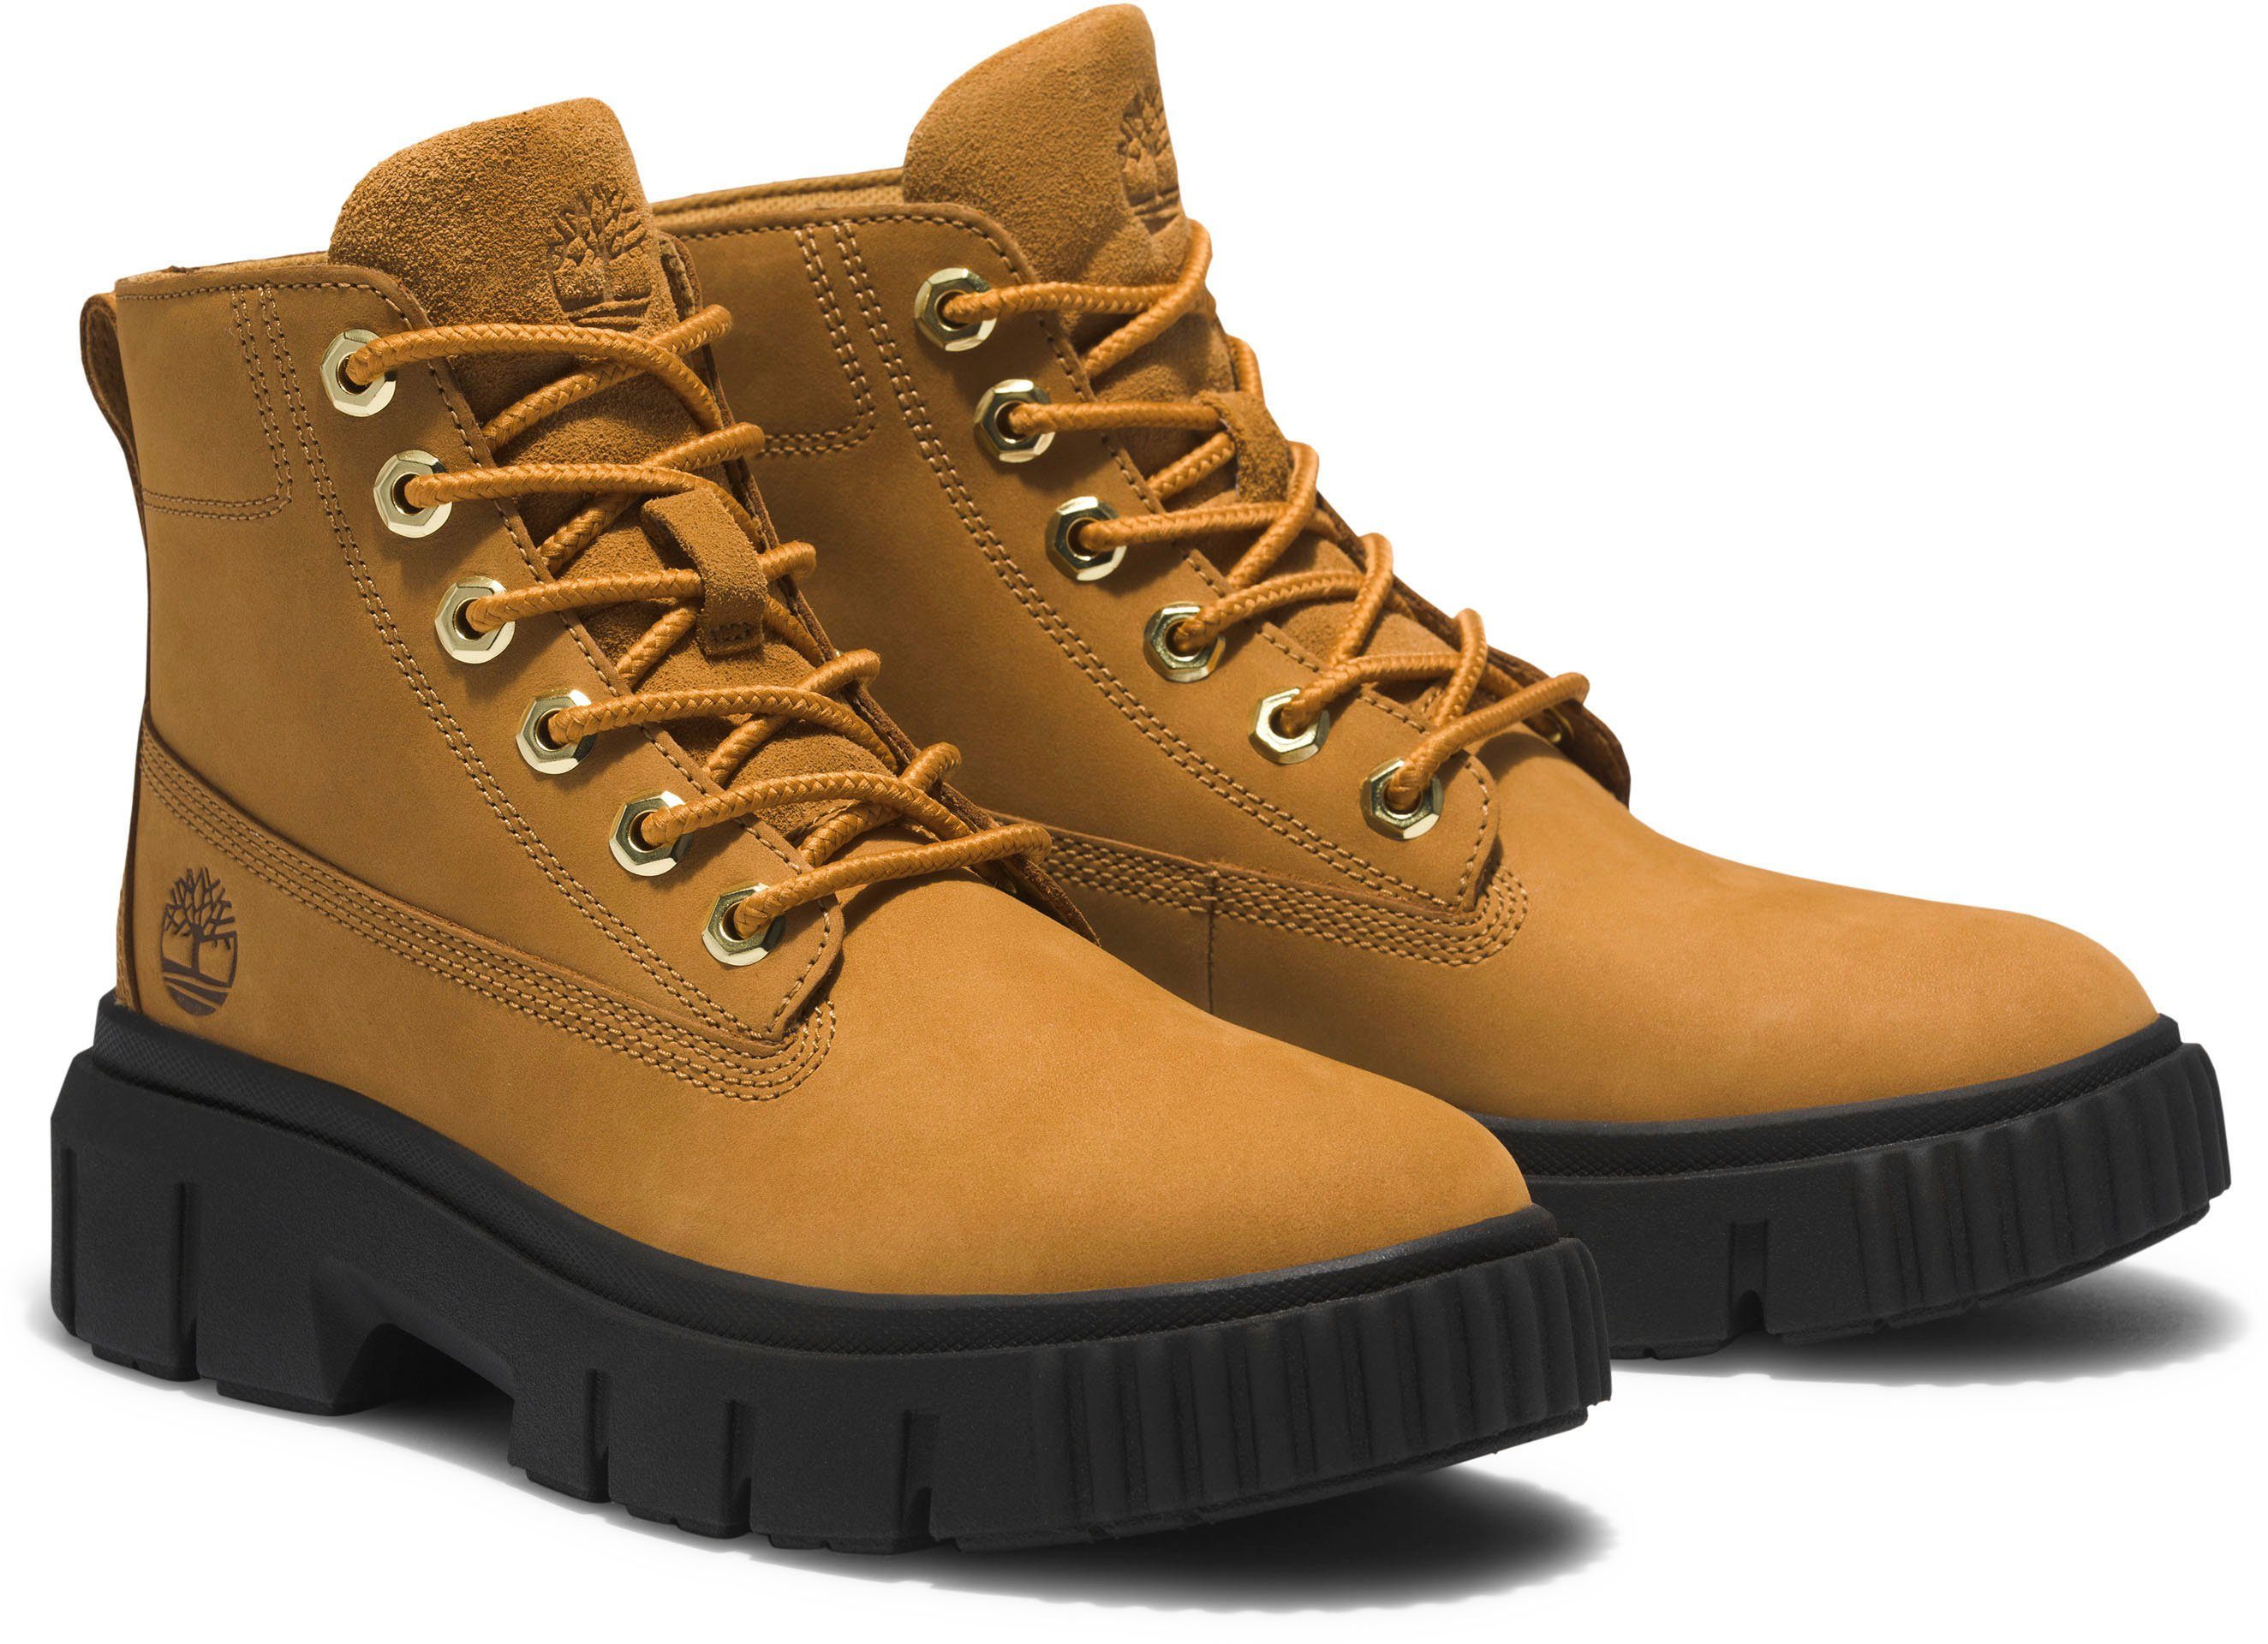 Timberland Greyfield Leather Boot Schnürboots wheat | Schnürboots